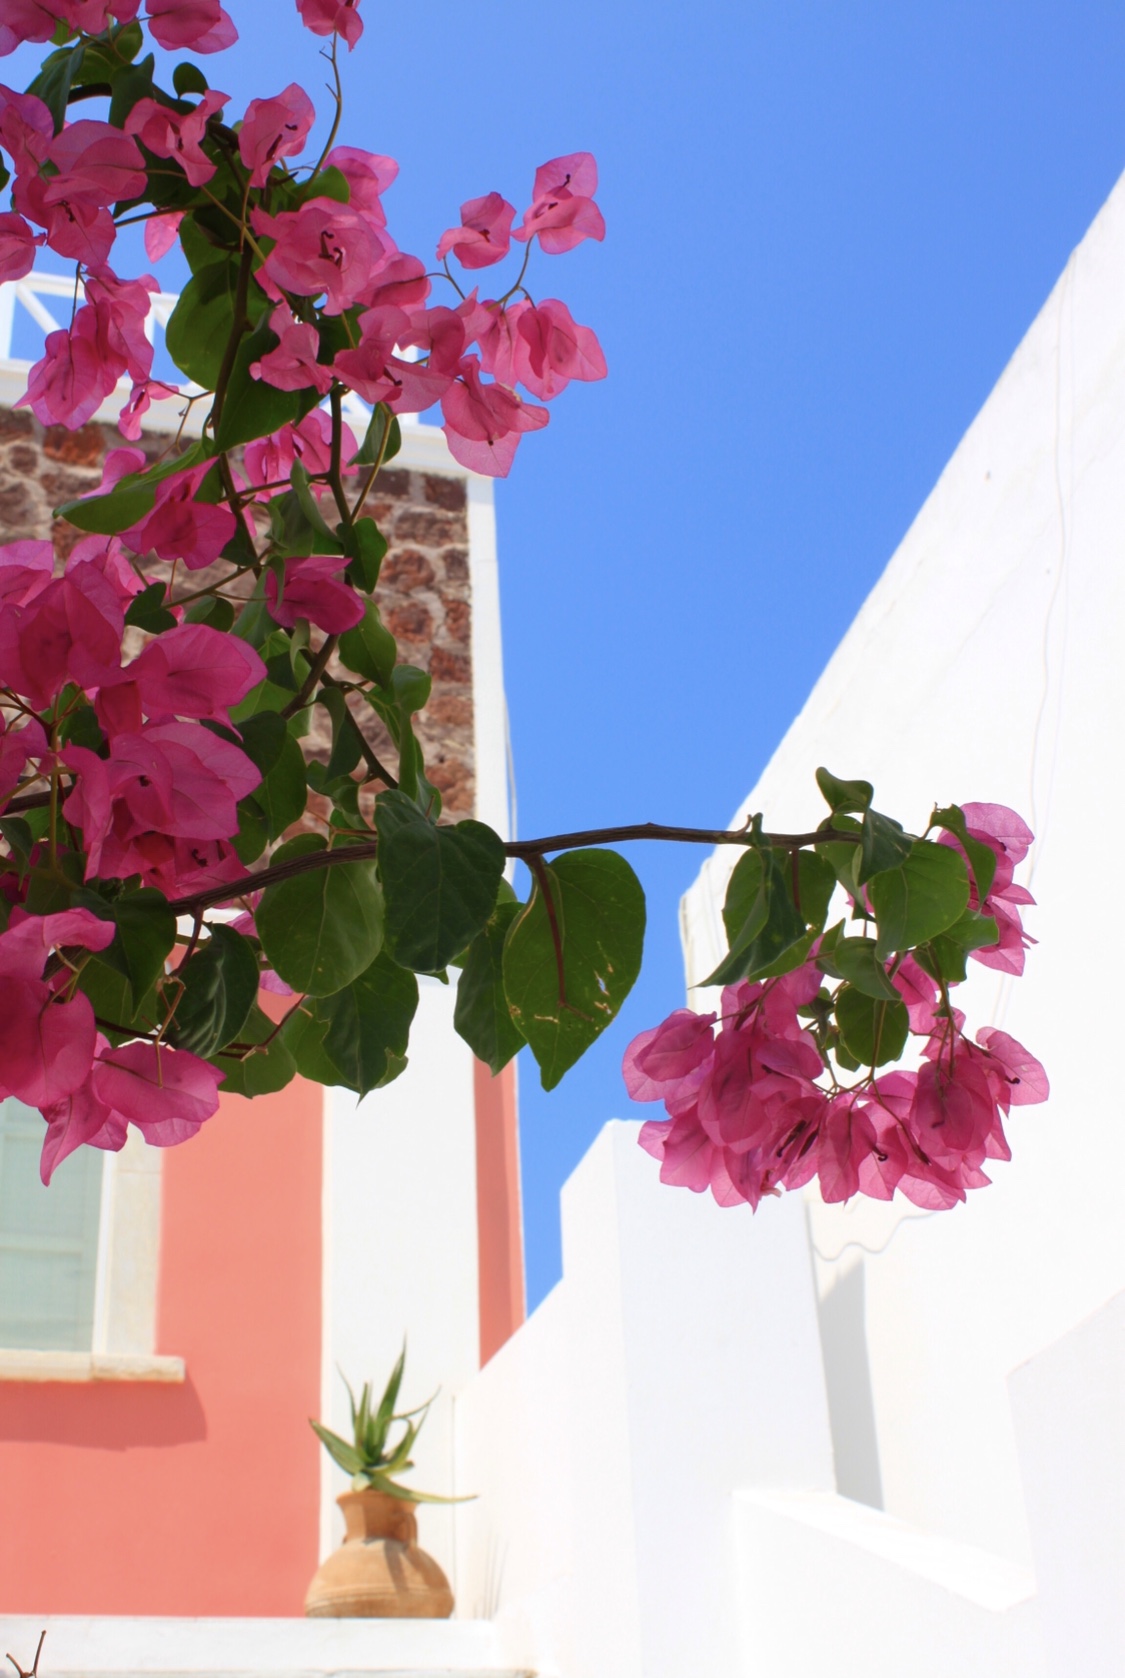 The vibrant colours of the island shout at me from all directions, beckoning me to walk down little alleyways and pulling me away from the crowd. I don’t know where I am but I keep moving forward. I look up and see the pink flowers of a tree against a bold blue and white background. I take a photo. 